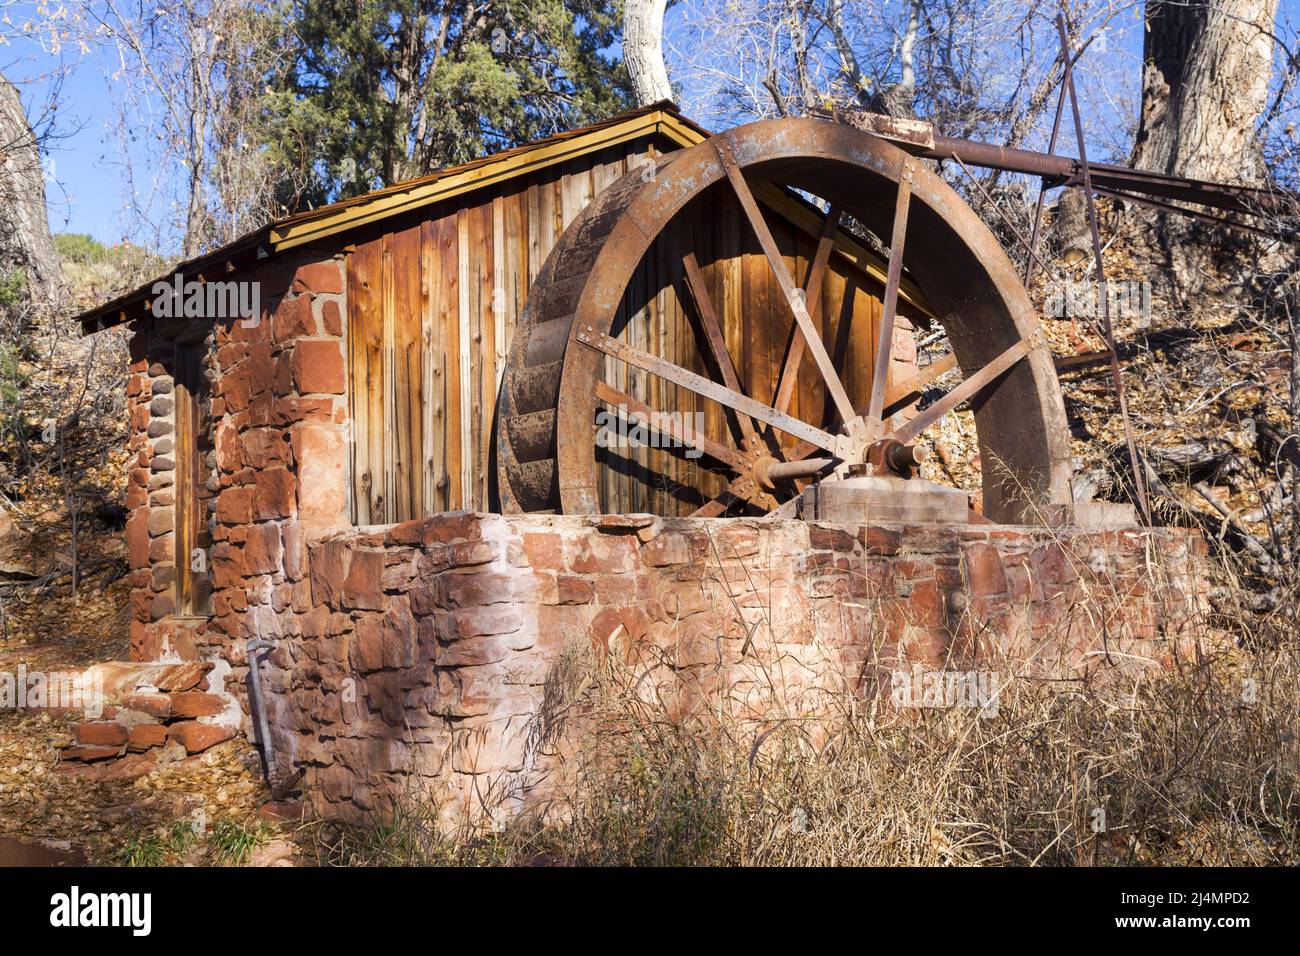 Vintage Old Wooden Water Wheel Mill by Oak Creek at Crescent Moon Ranch Provincial Park, Sedona Arizona Stock Photo